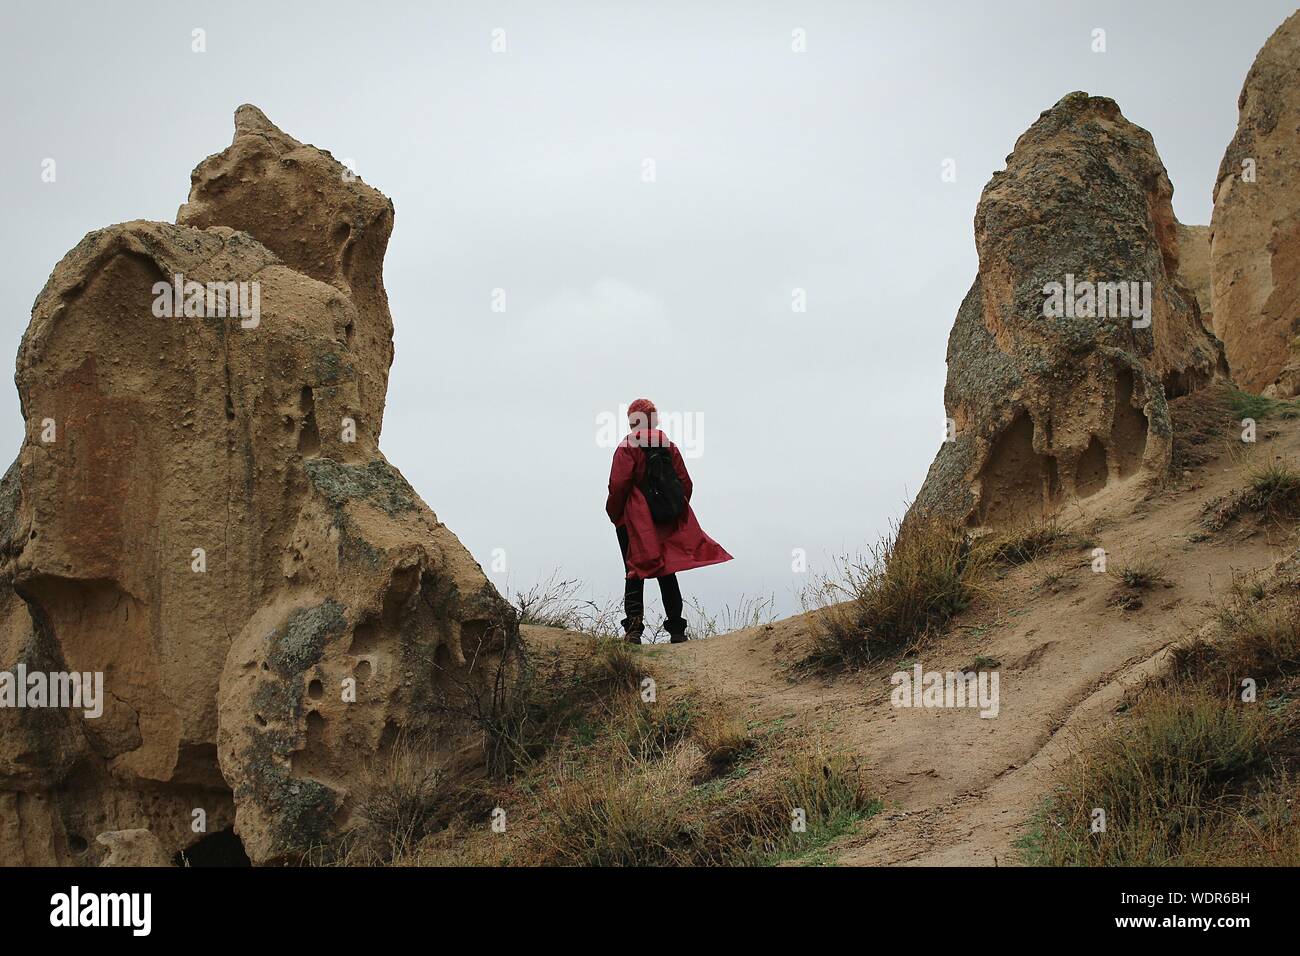 Rear View Of Hiker Amidst Rock Formation Against Sky At Cappadocia Stock Photo